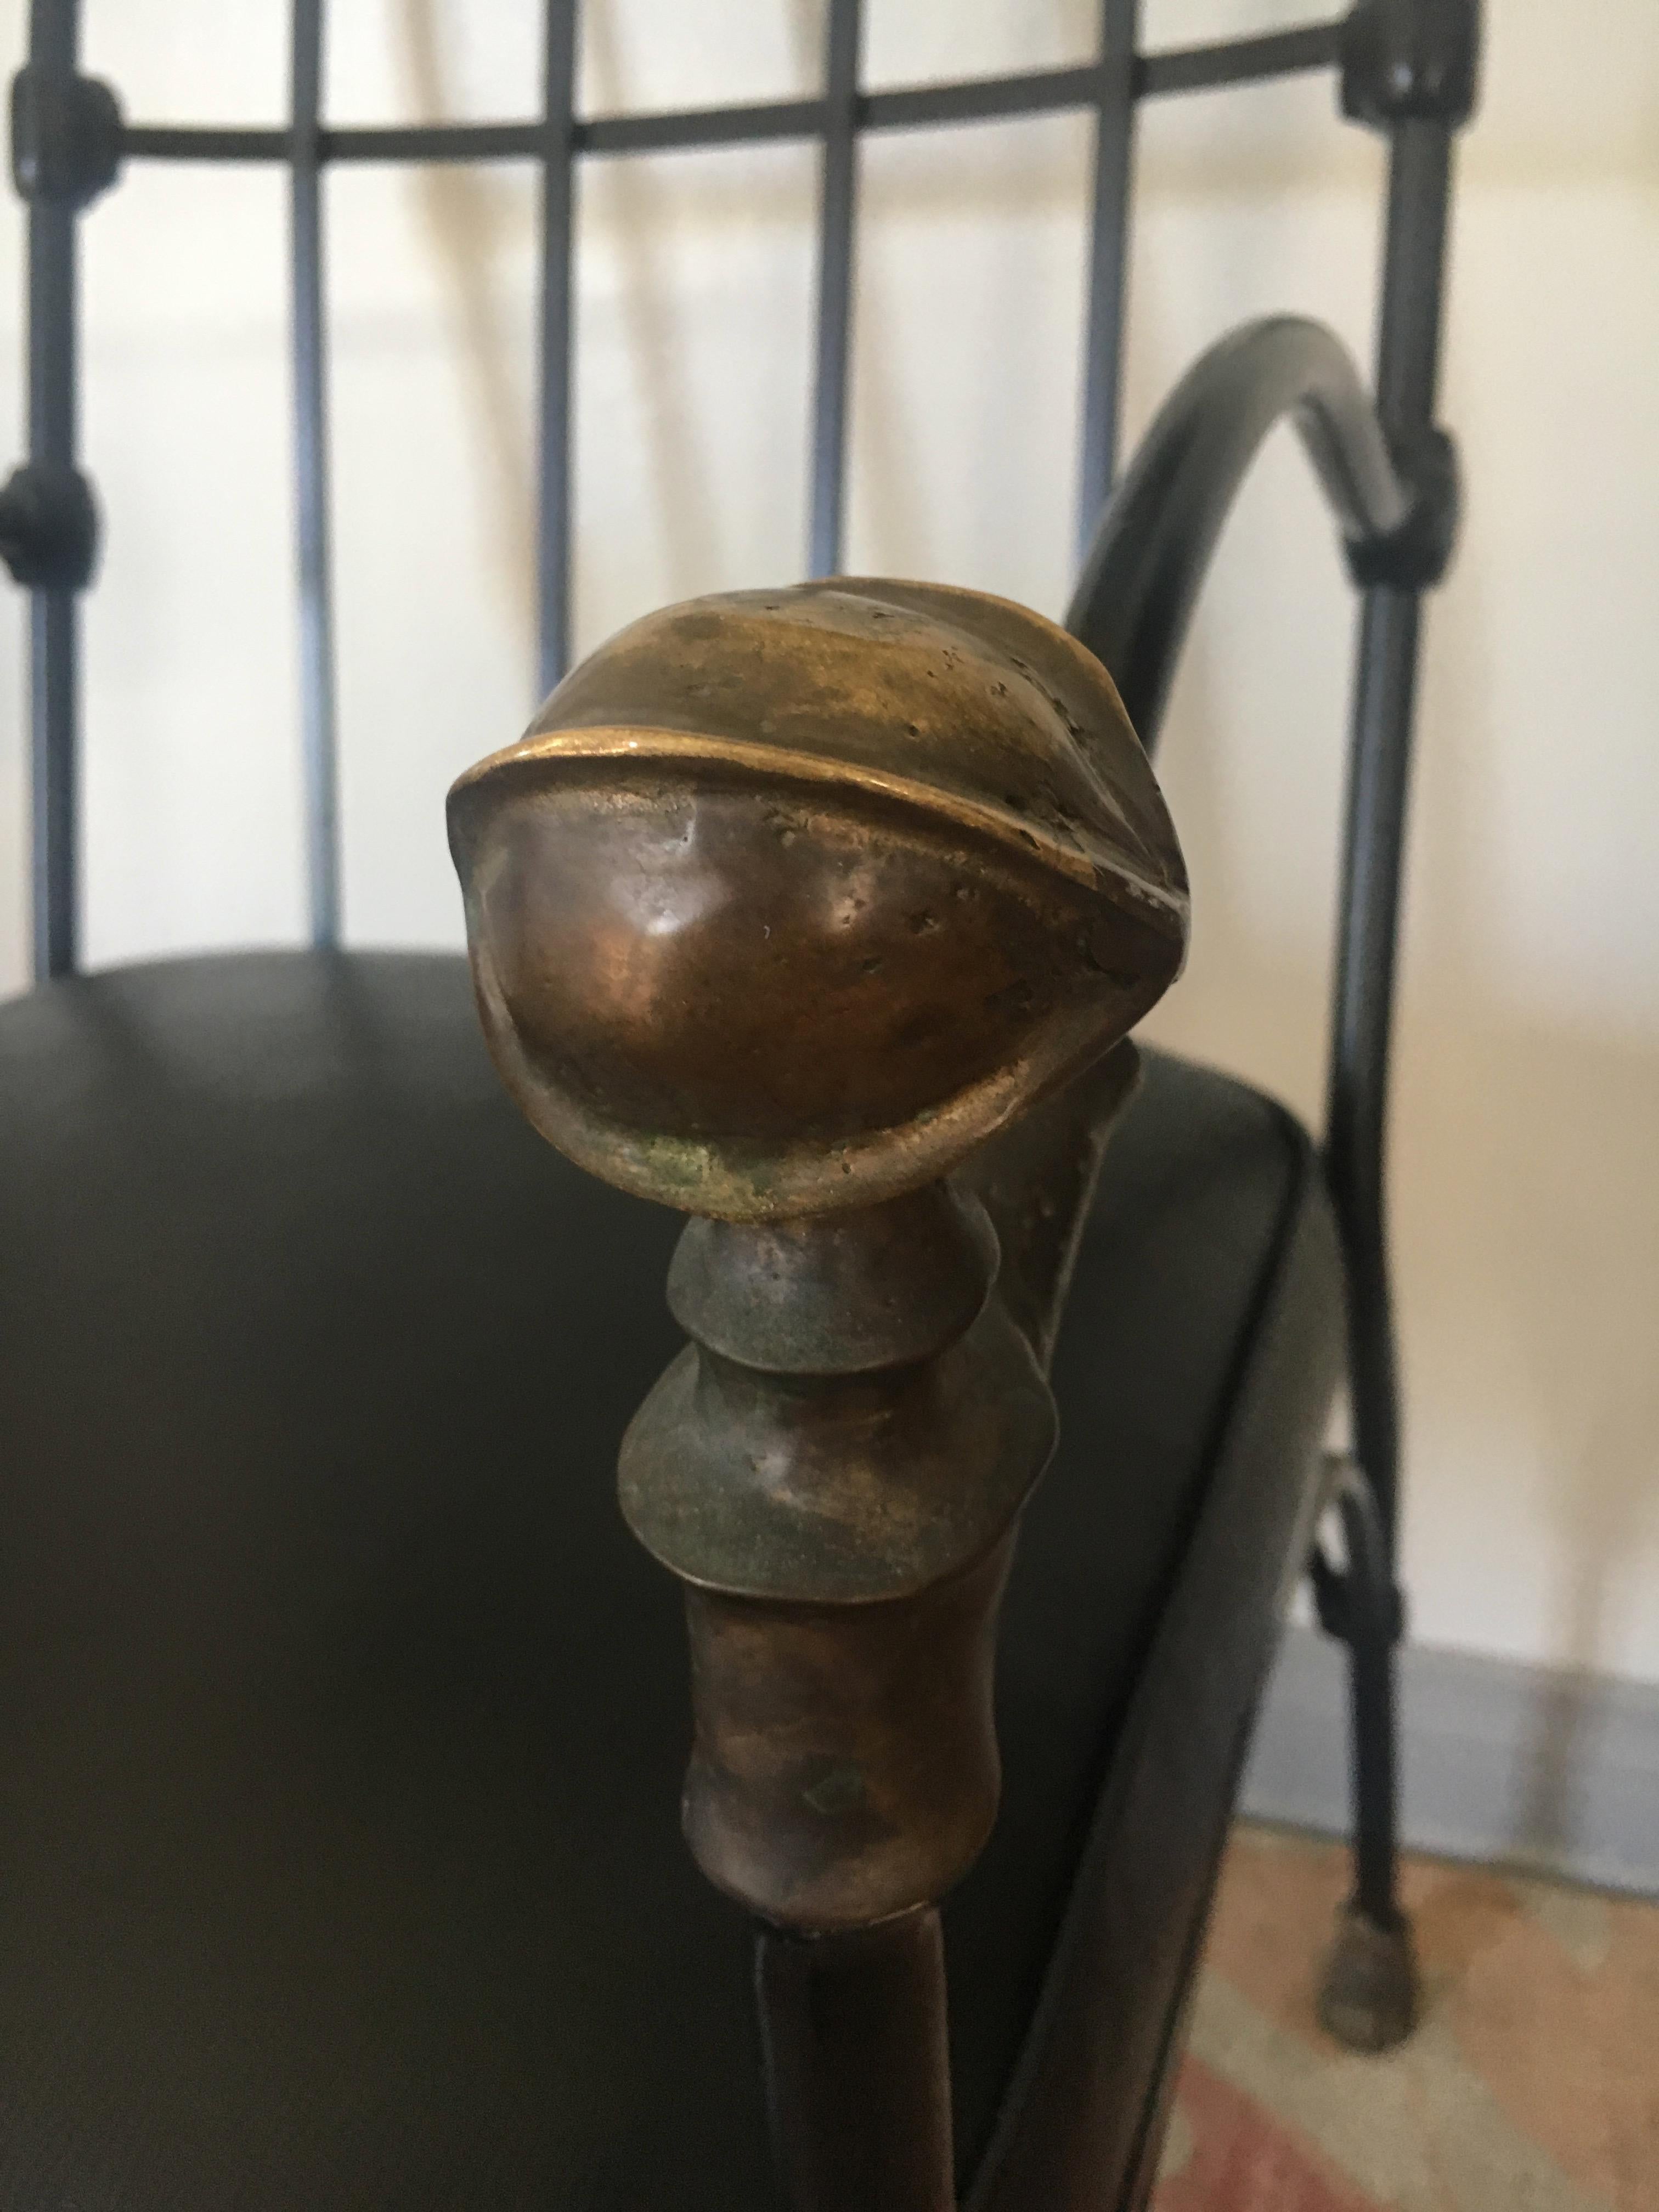 Wrought iron chair with bronze ball detail - A handsome chair newly restored and upholstered - (If you have your own personal desired fabric, the seat is easily re-upholstered to your decor) - The wrought iron, in the manner of Italian artist